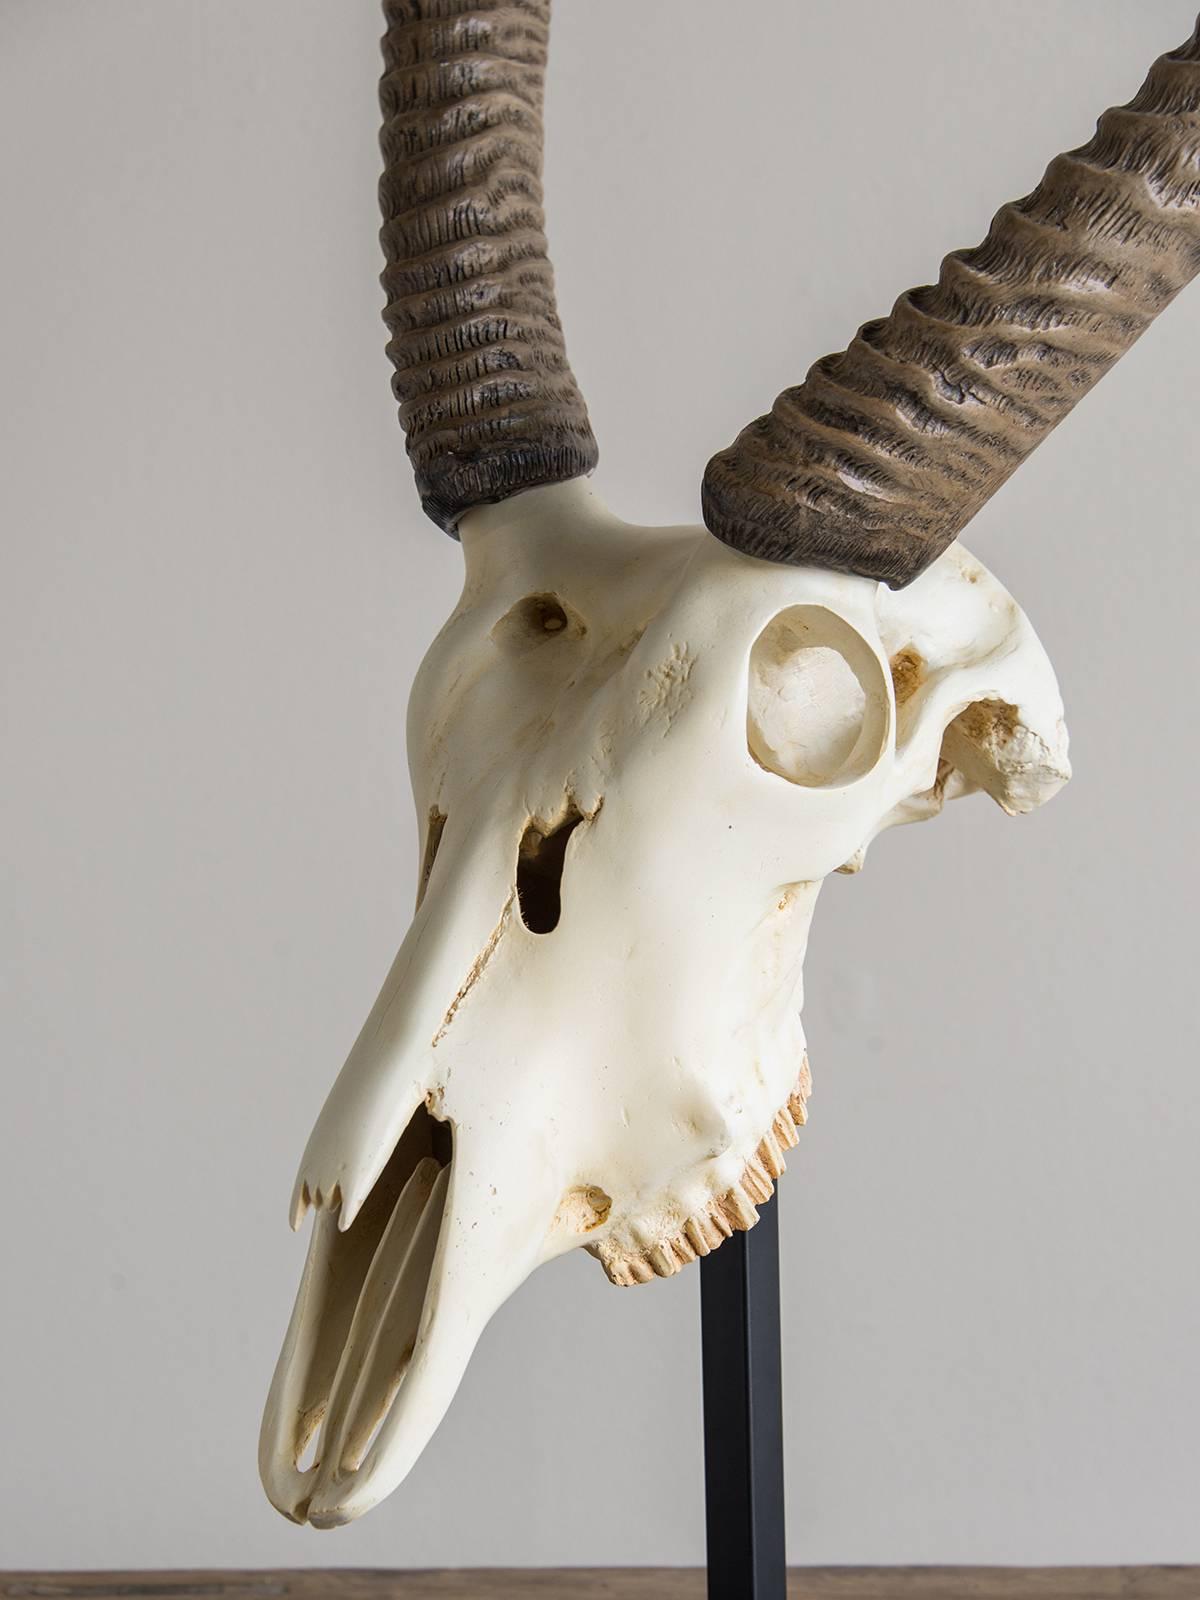 Receive our new selections direct from 1stdibs by email each week. Please click Follow Dealer below and see them first!

This striking model is representative of the powerful impact animals possess. The skillfully rendered skull and horn have